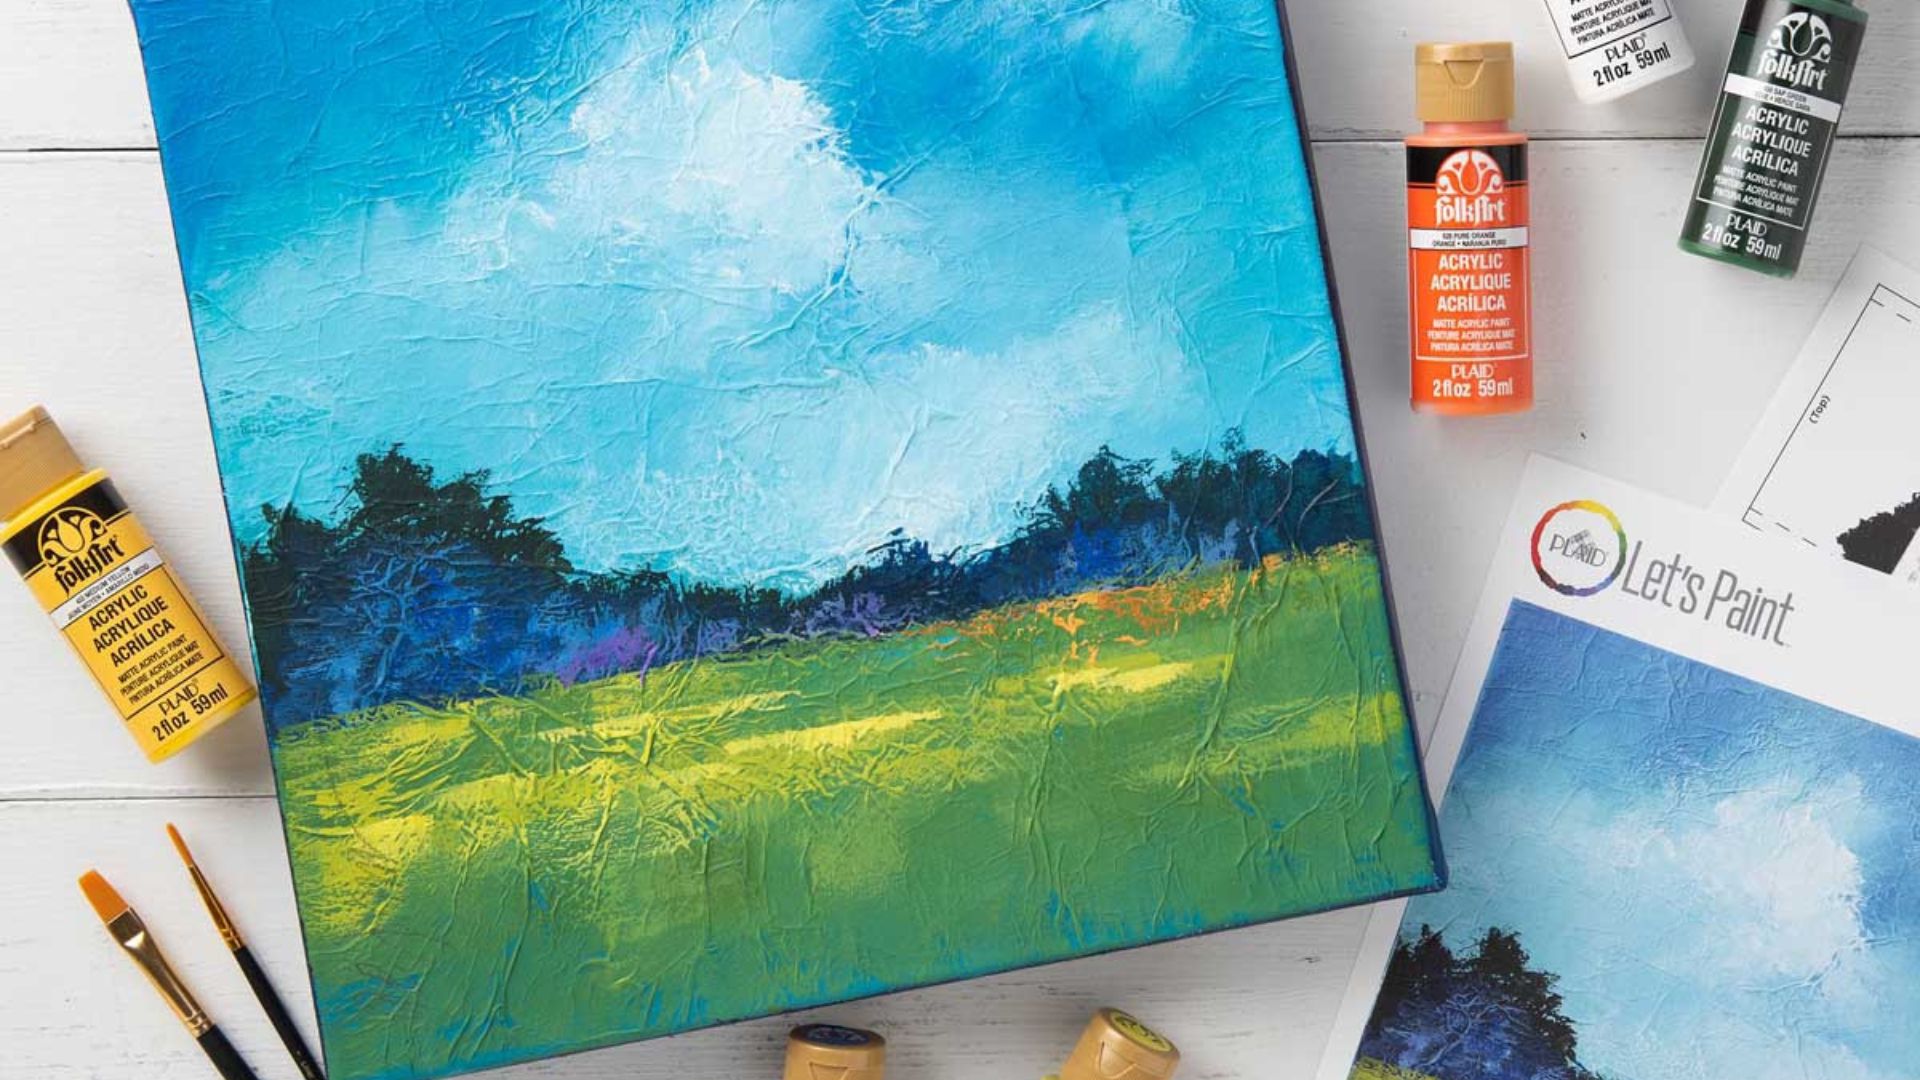 5 techniques to try with your next acrylic painting - ArtWeb Blog